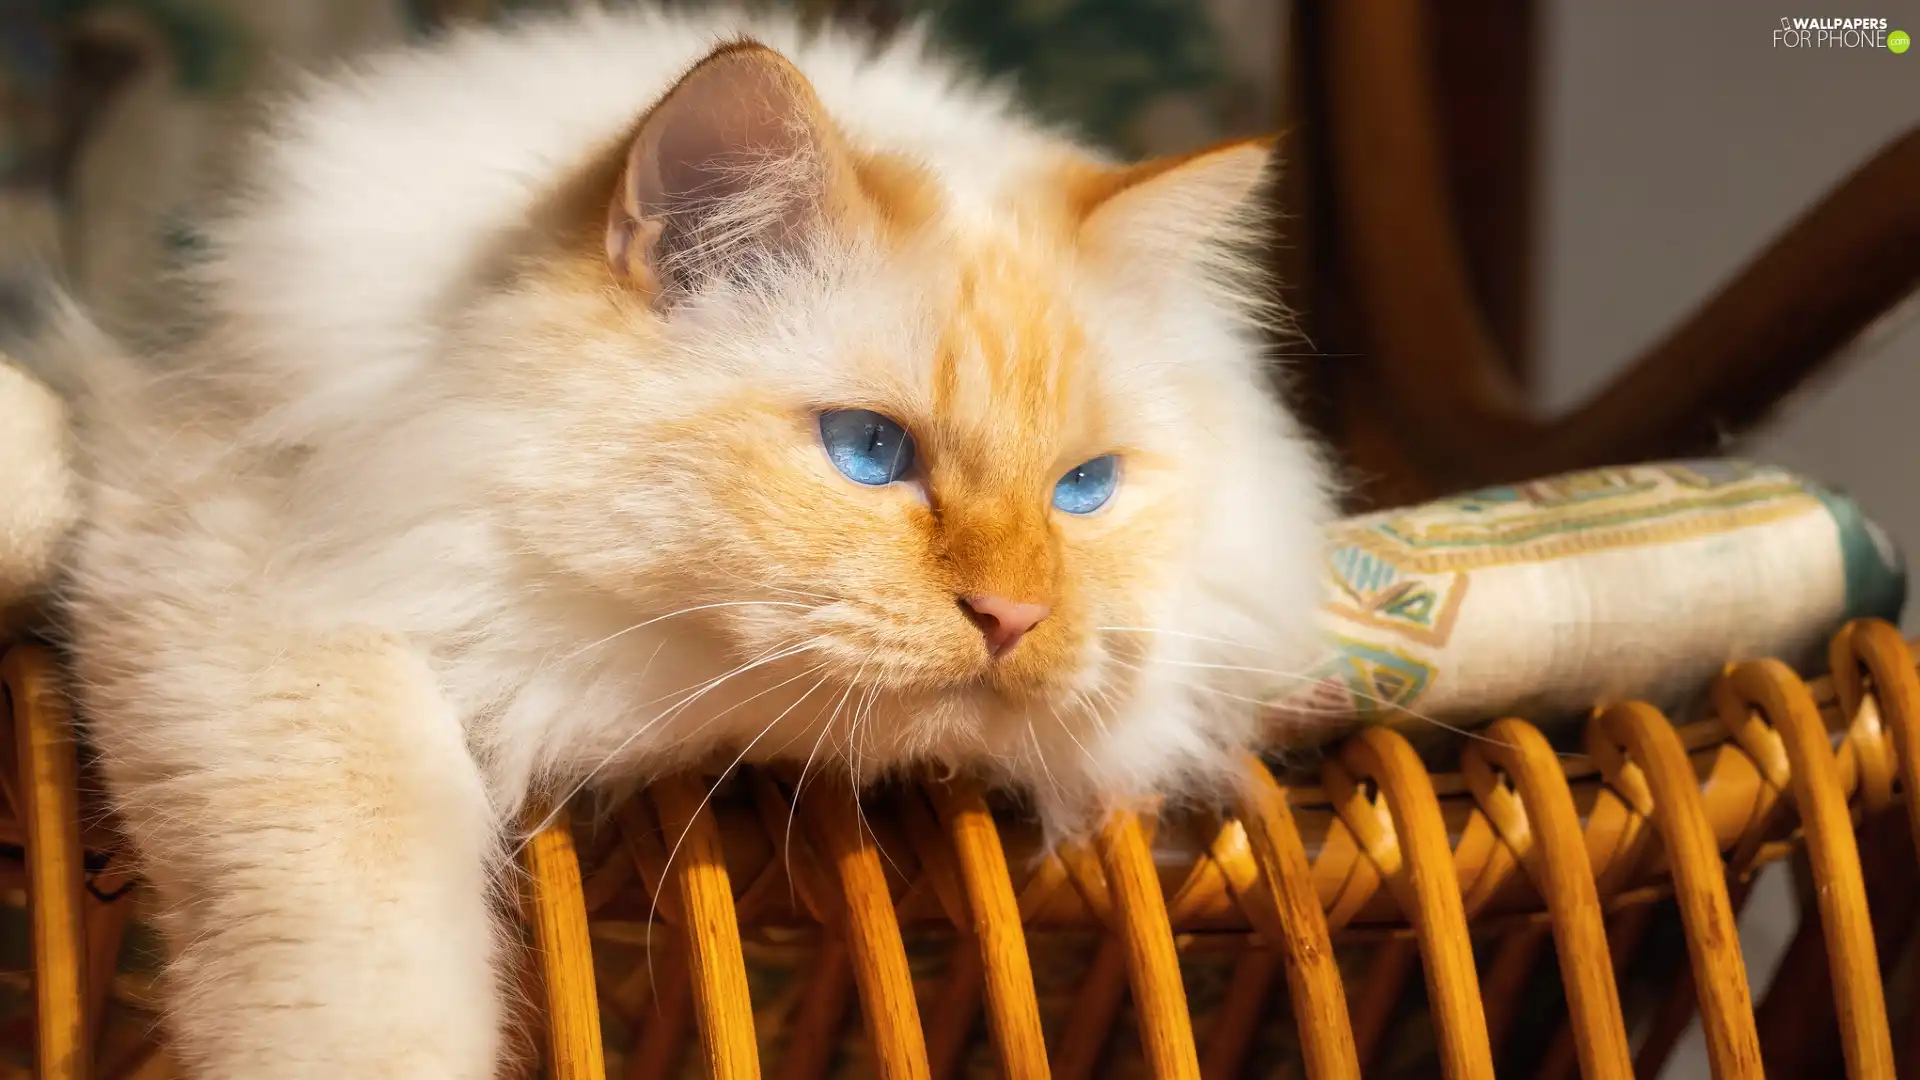 wicker, Chair, Blue Eyed, cat, Longhaired